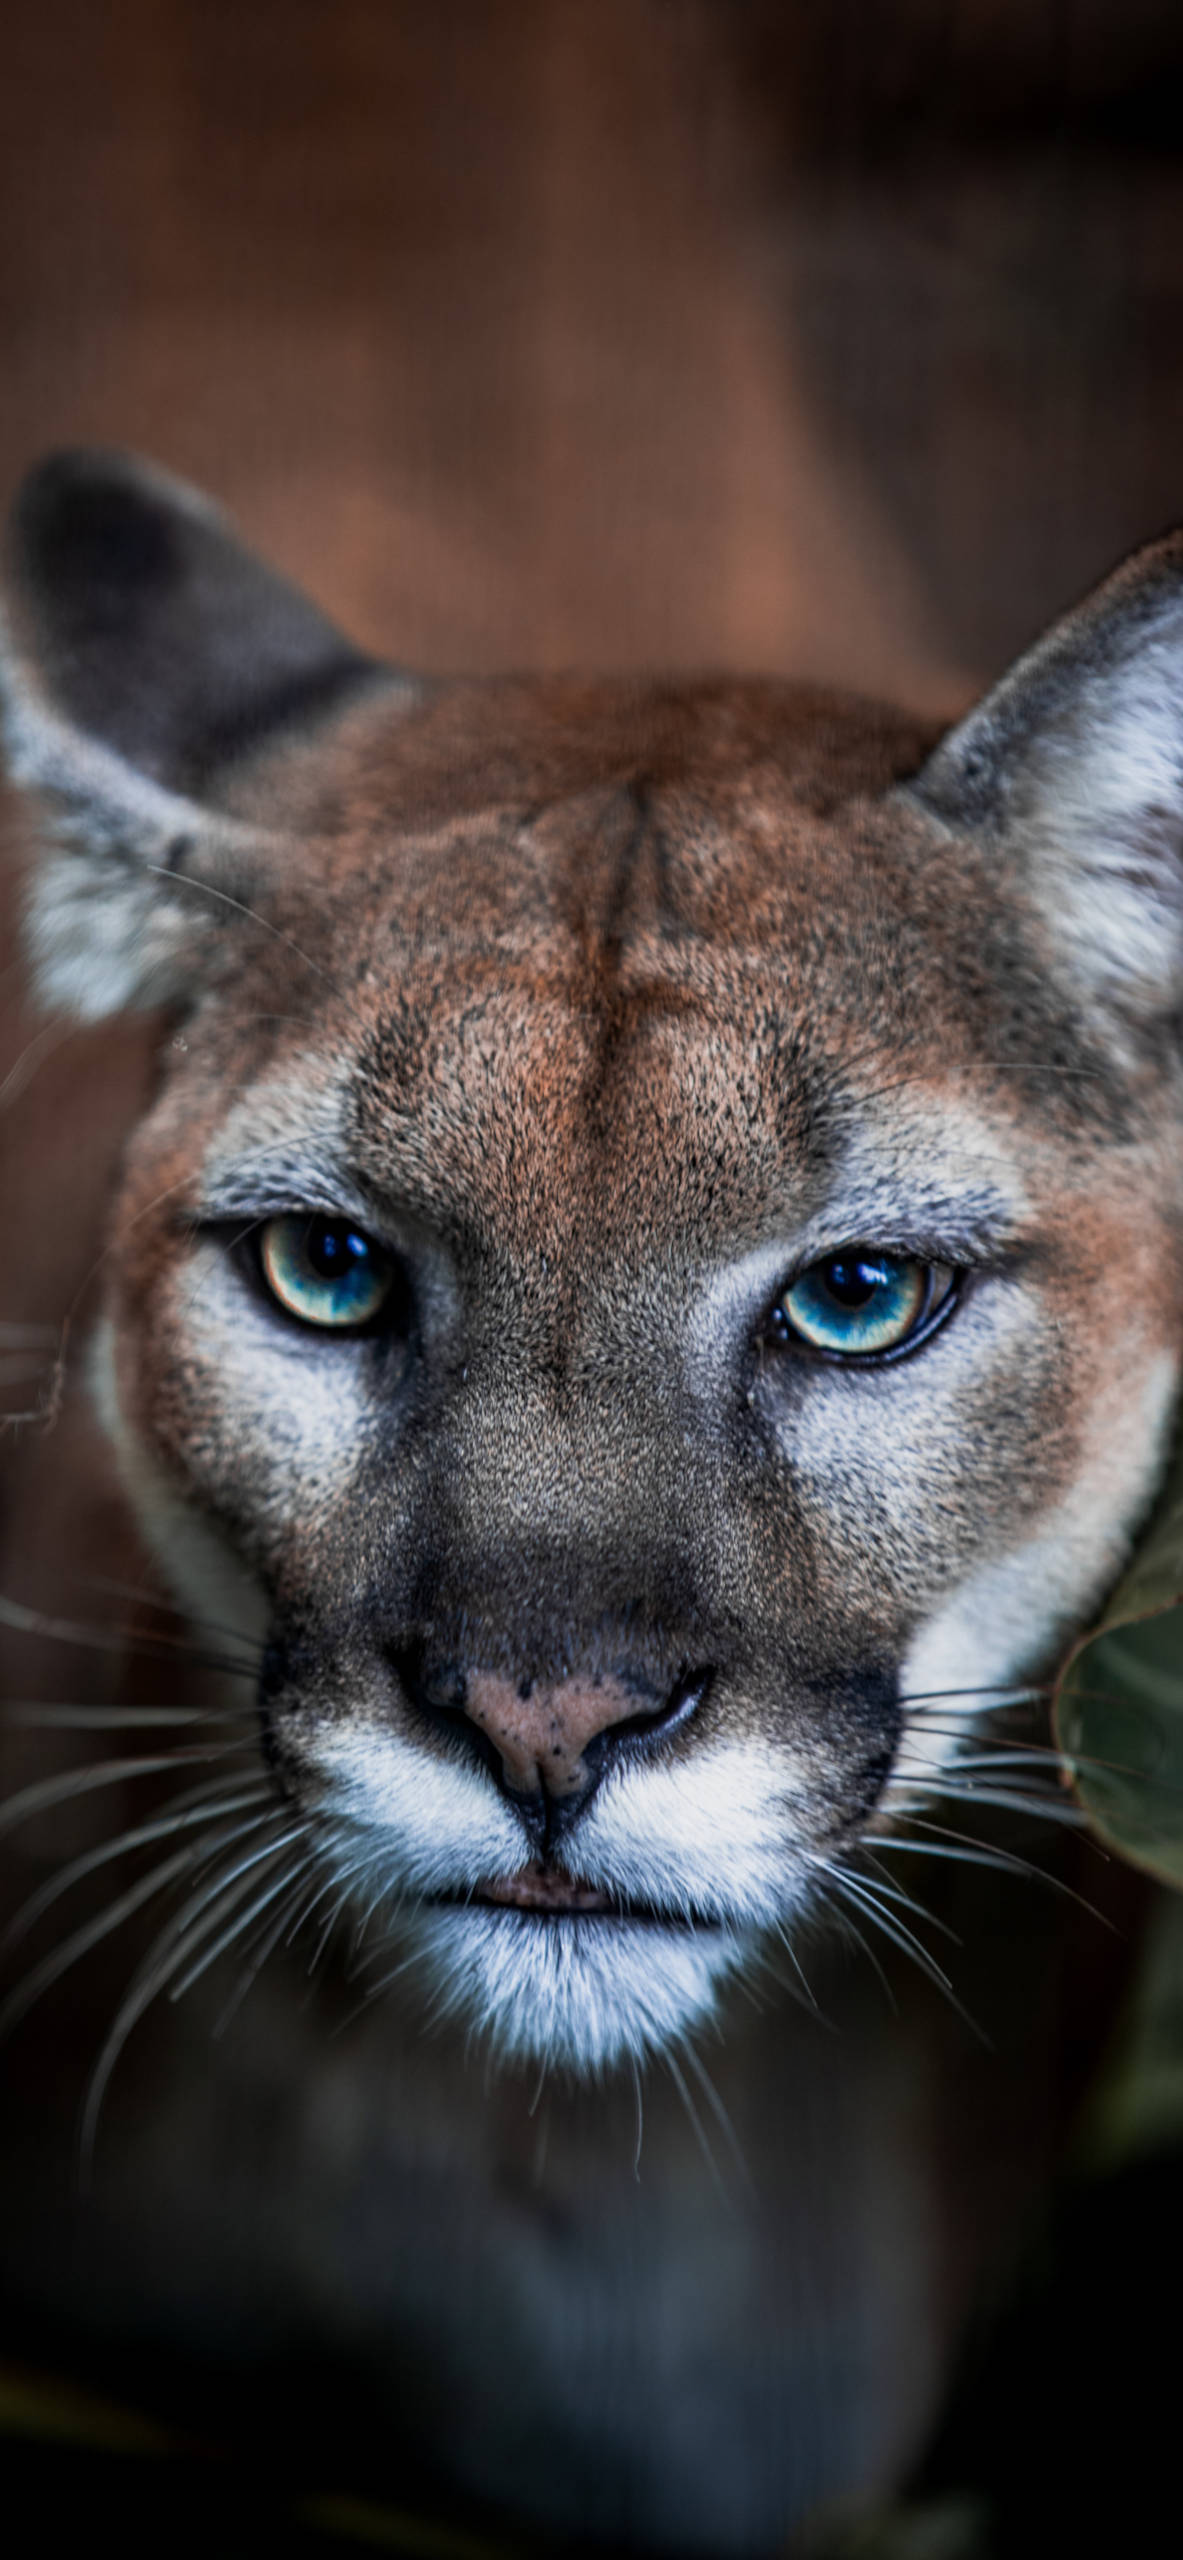 Cougar wallpaper for iphone pro max x